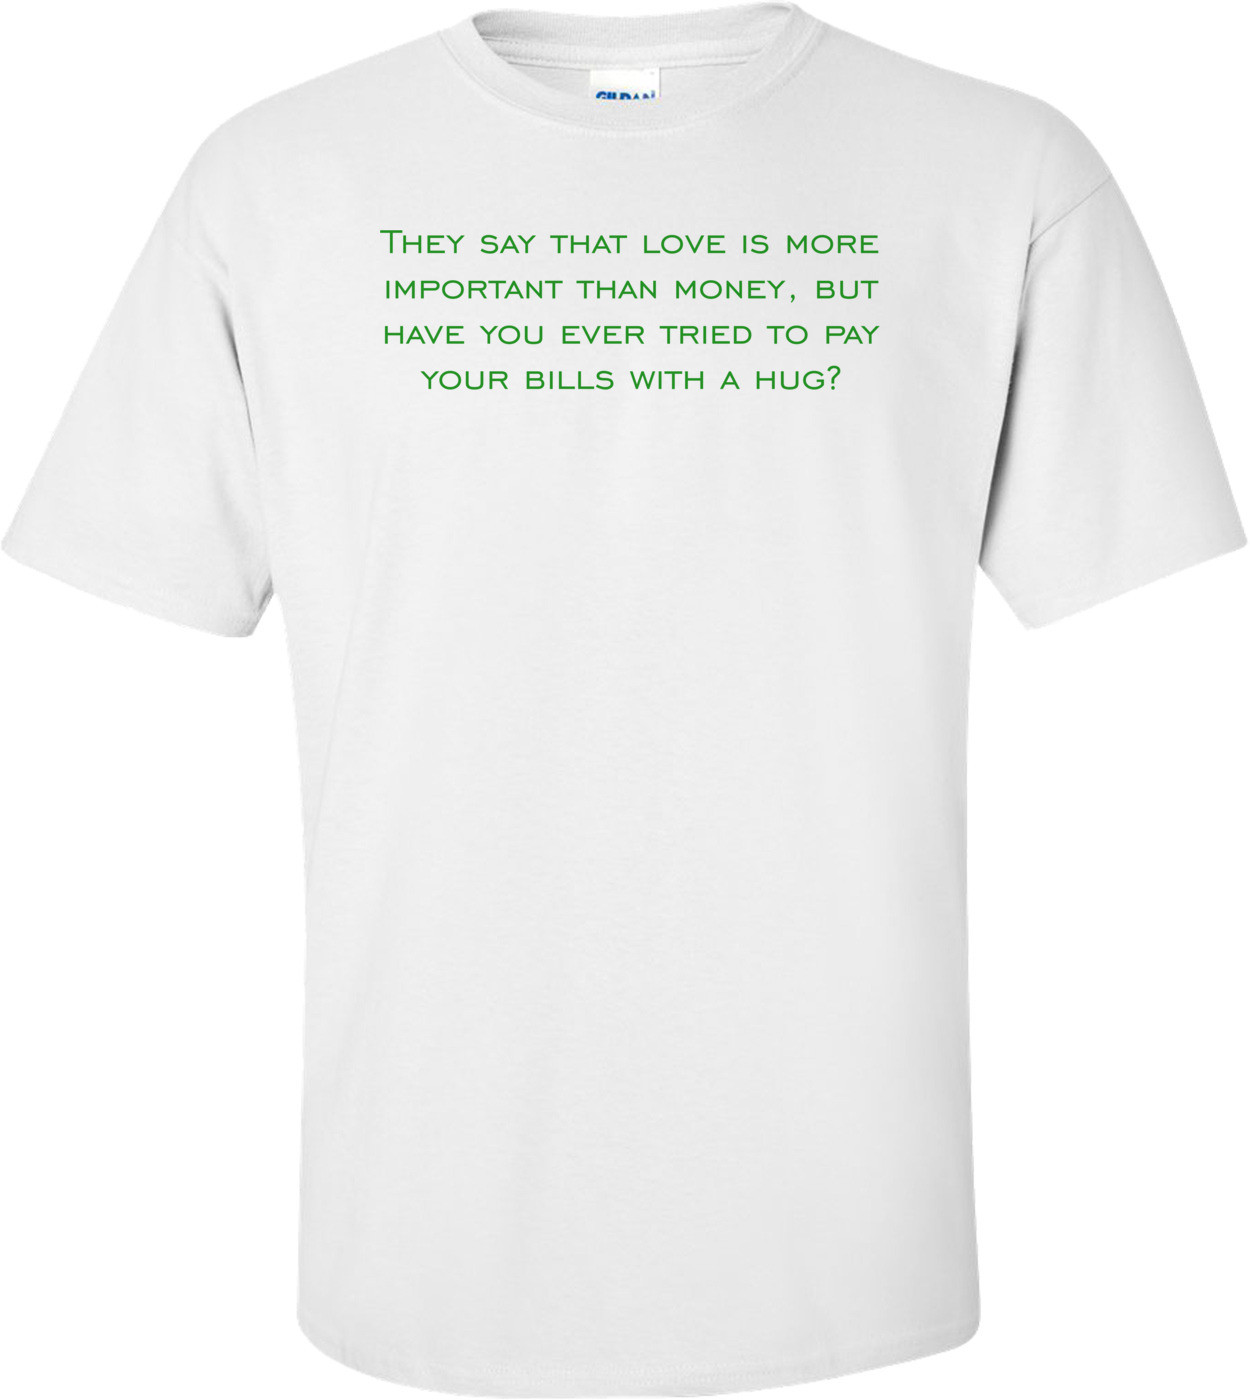 They say that love is more important than money, but have you ever tried to pay your bills with a hug? Shirt